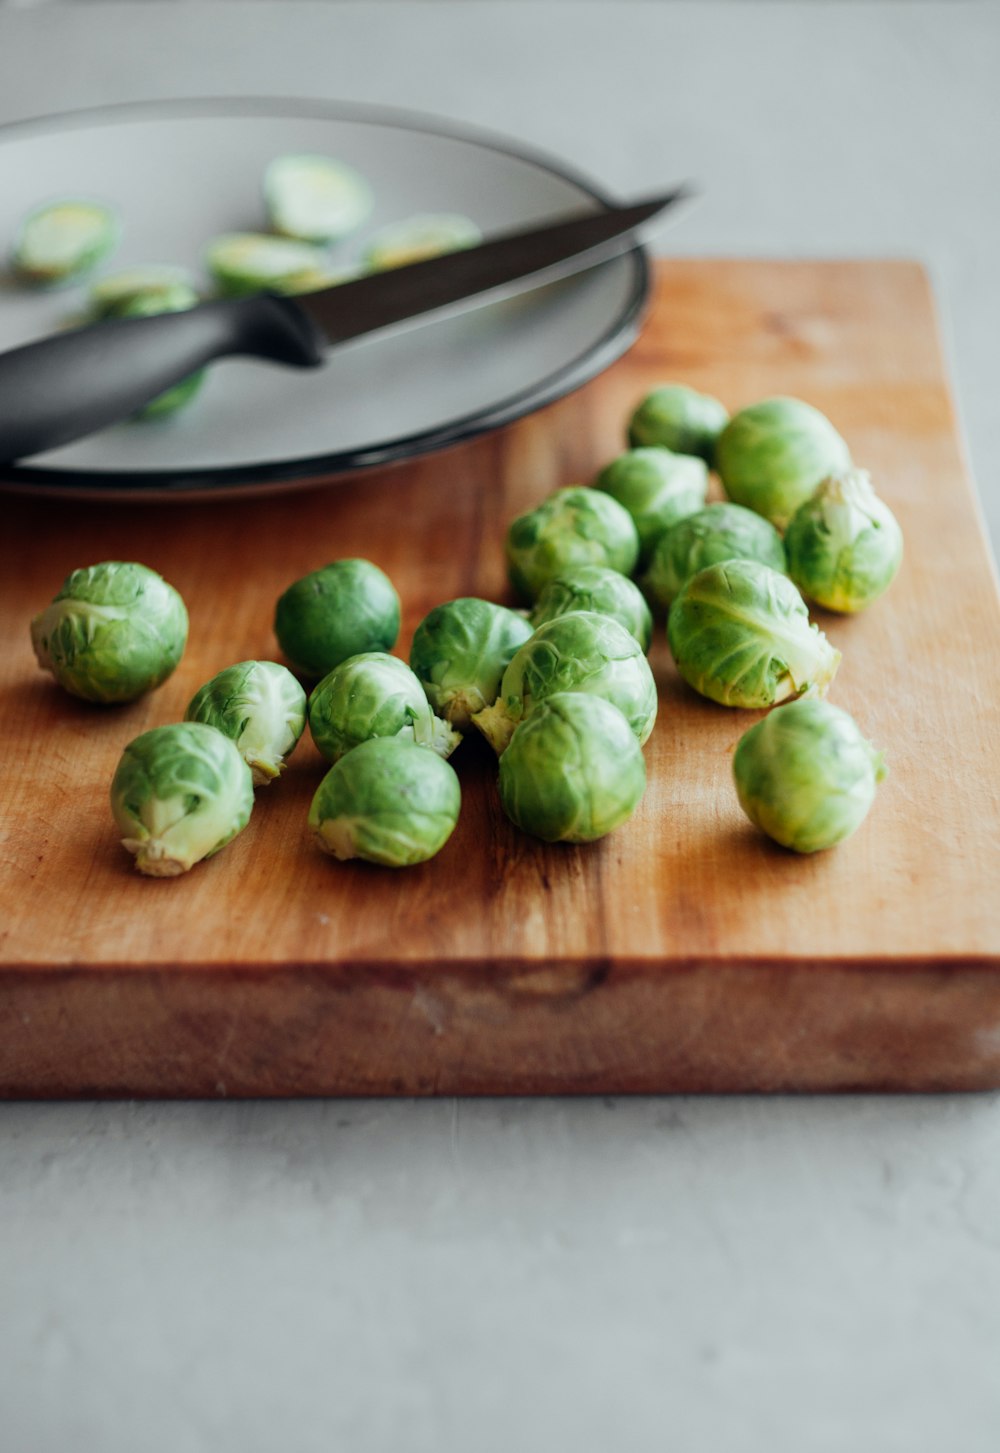 brussel sprouts on wooden chopping board and plate